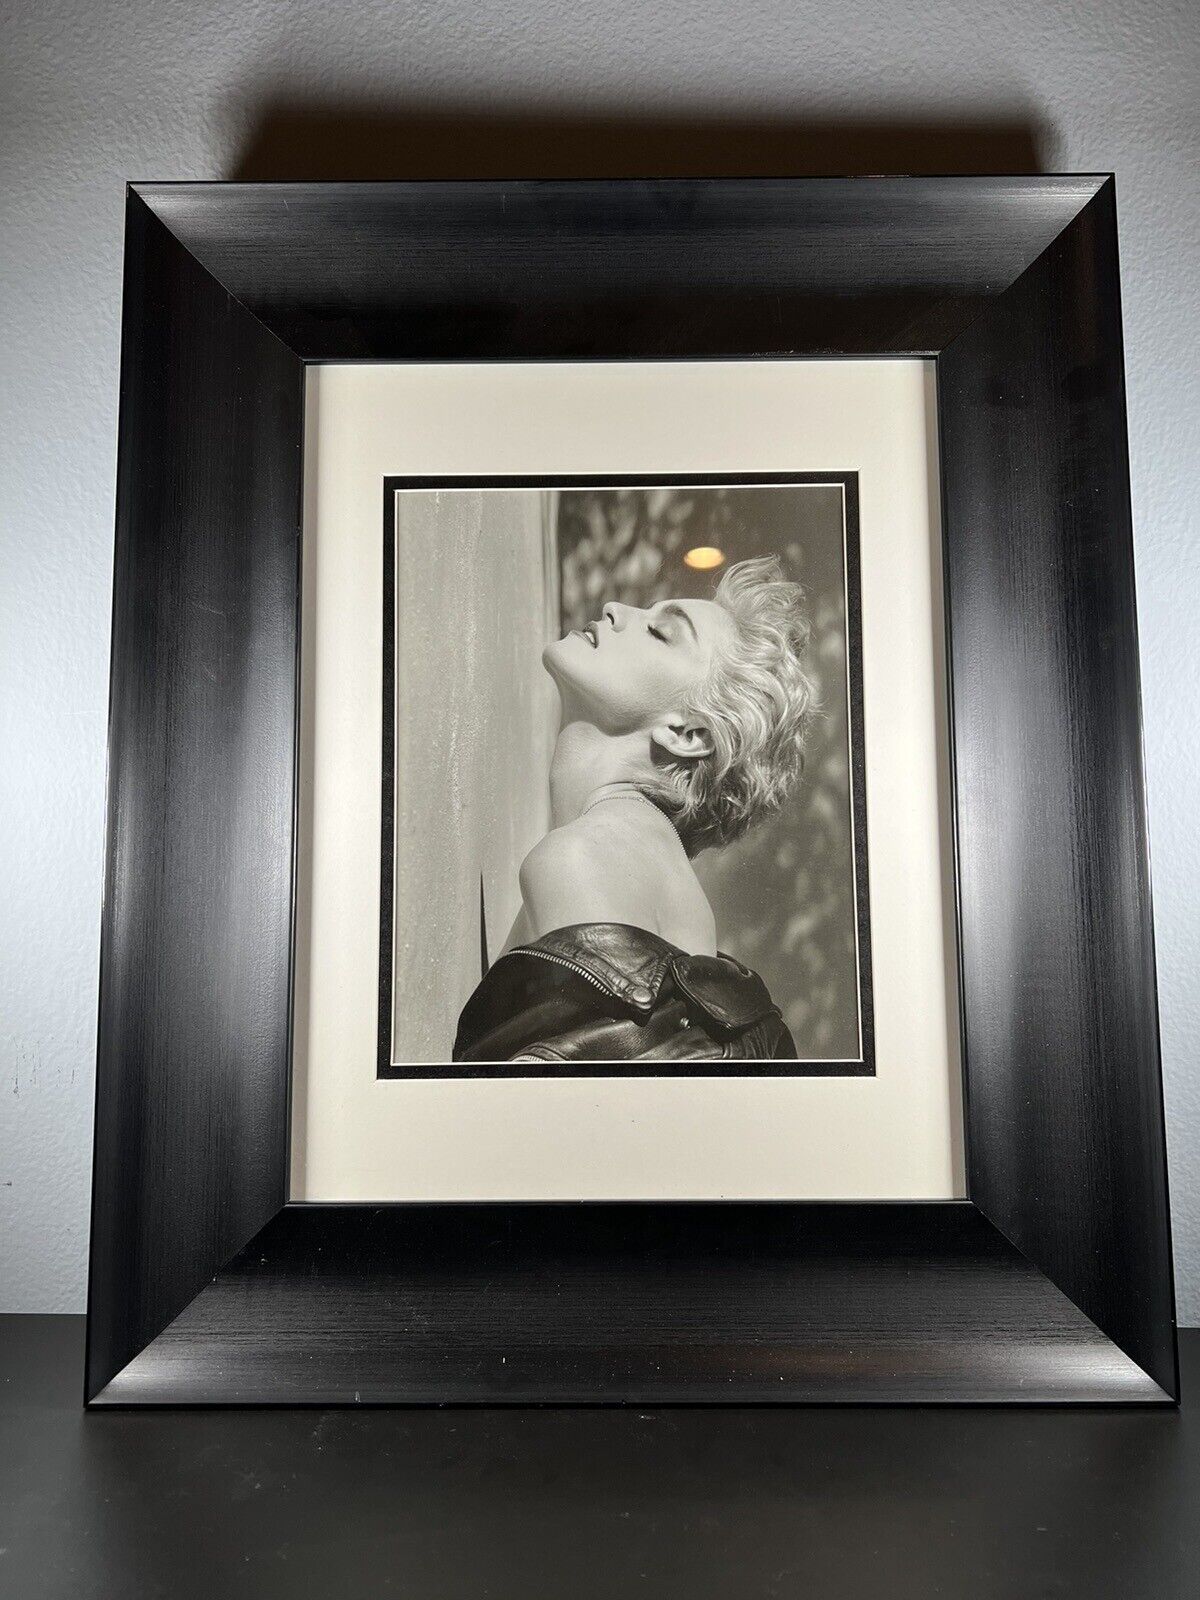 Rare Herb Ritts B&W Glamour Photo Of Madonna 8x10” In 18x22” Frame w/COA